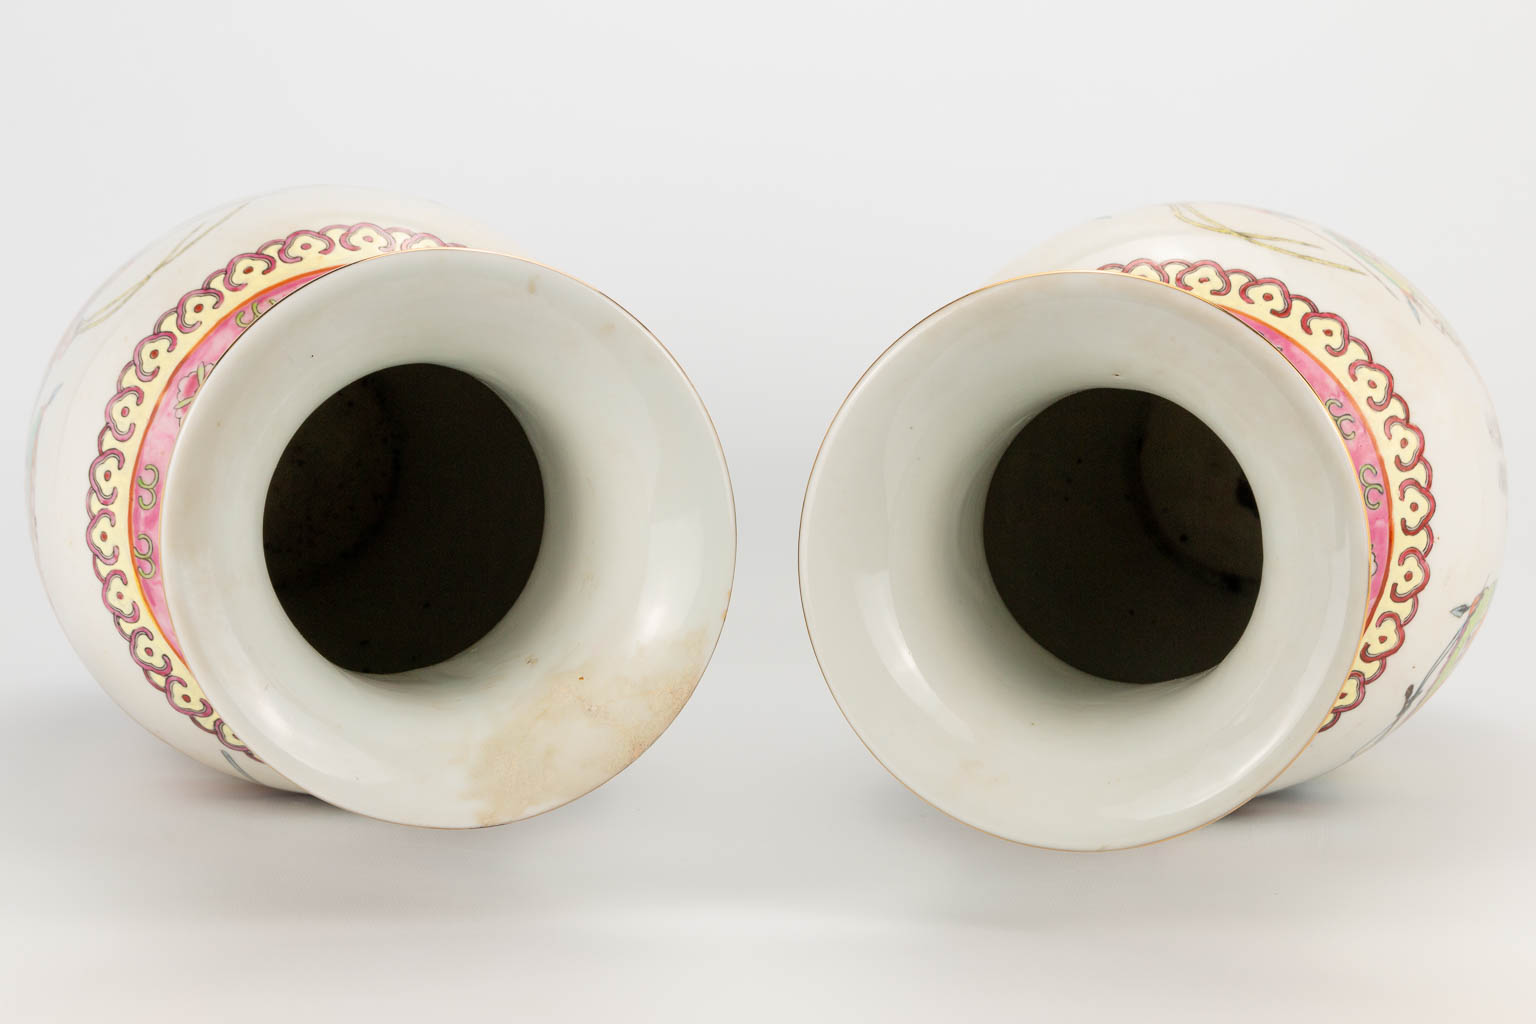 A pair of vases made of Chinese porcelain with decors of knights. 20th century. (46 x 18 cm) - Image 2 of 27